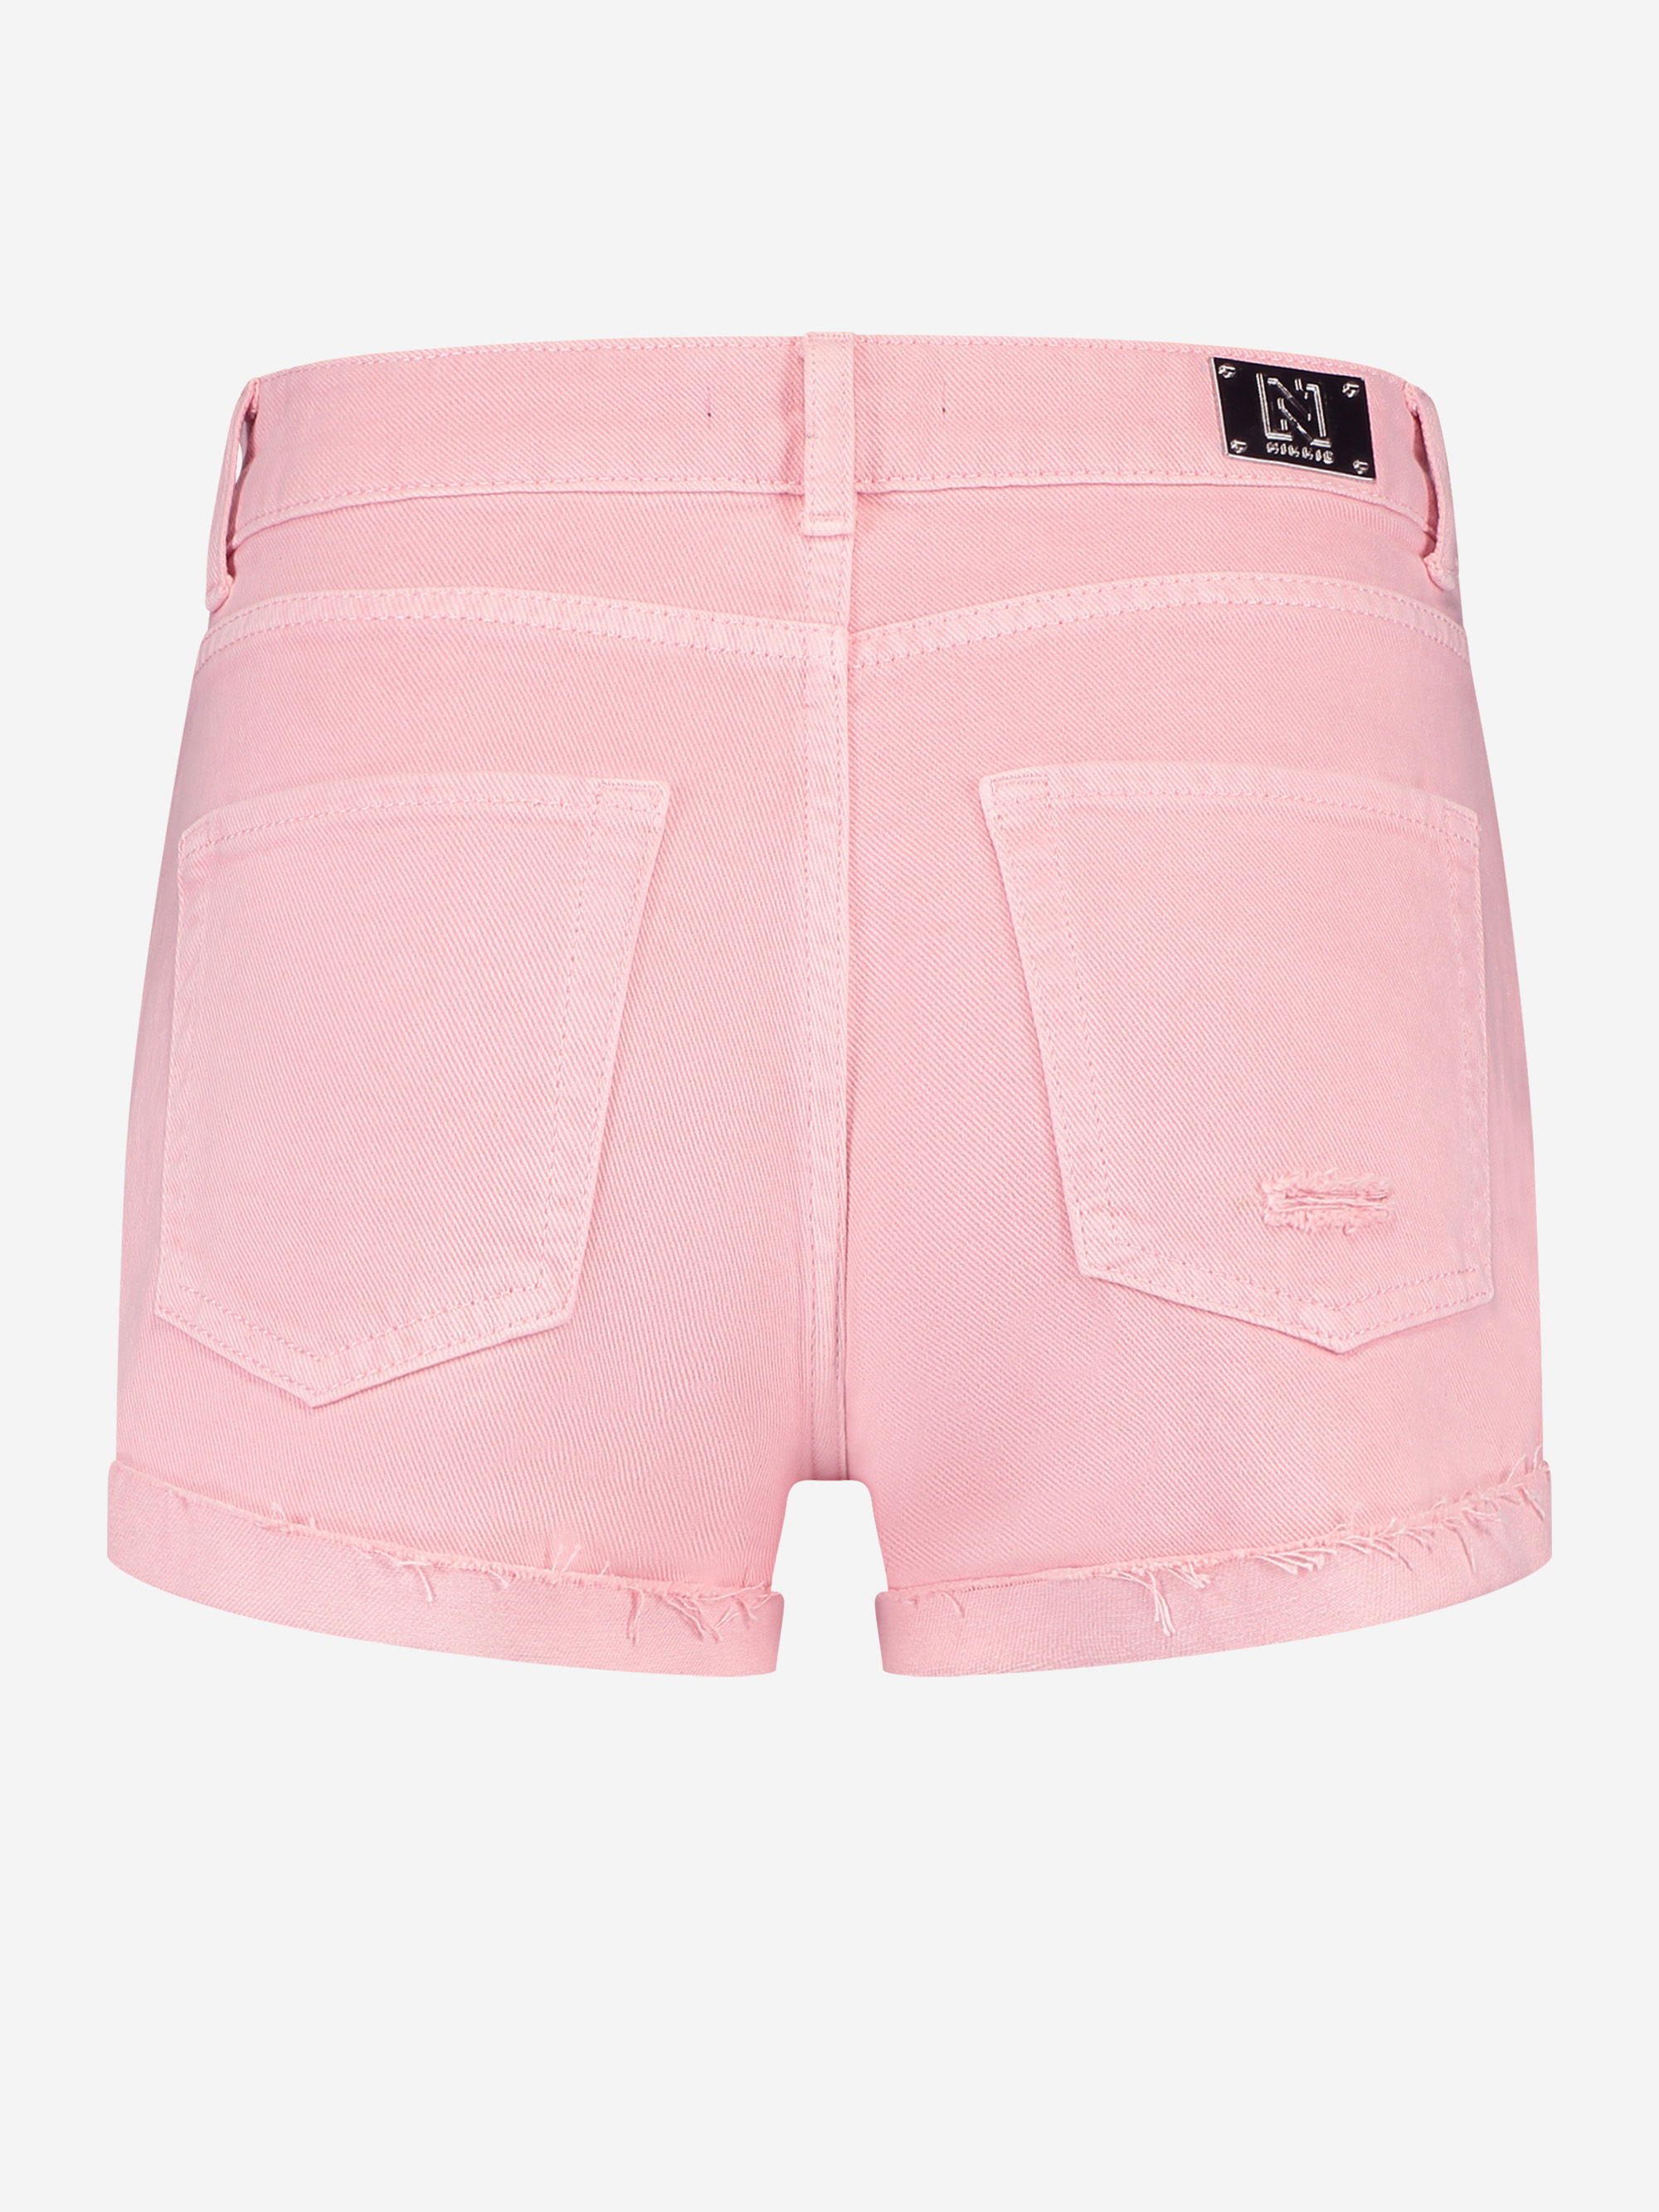 Brentwood Shorts